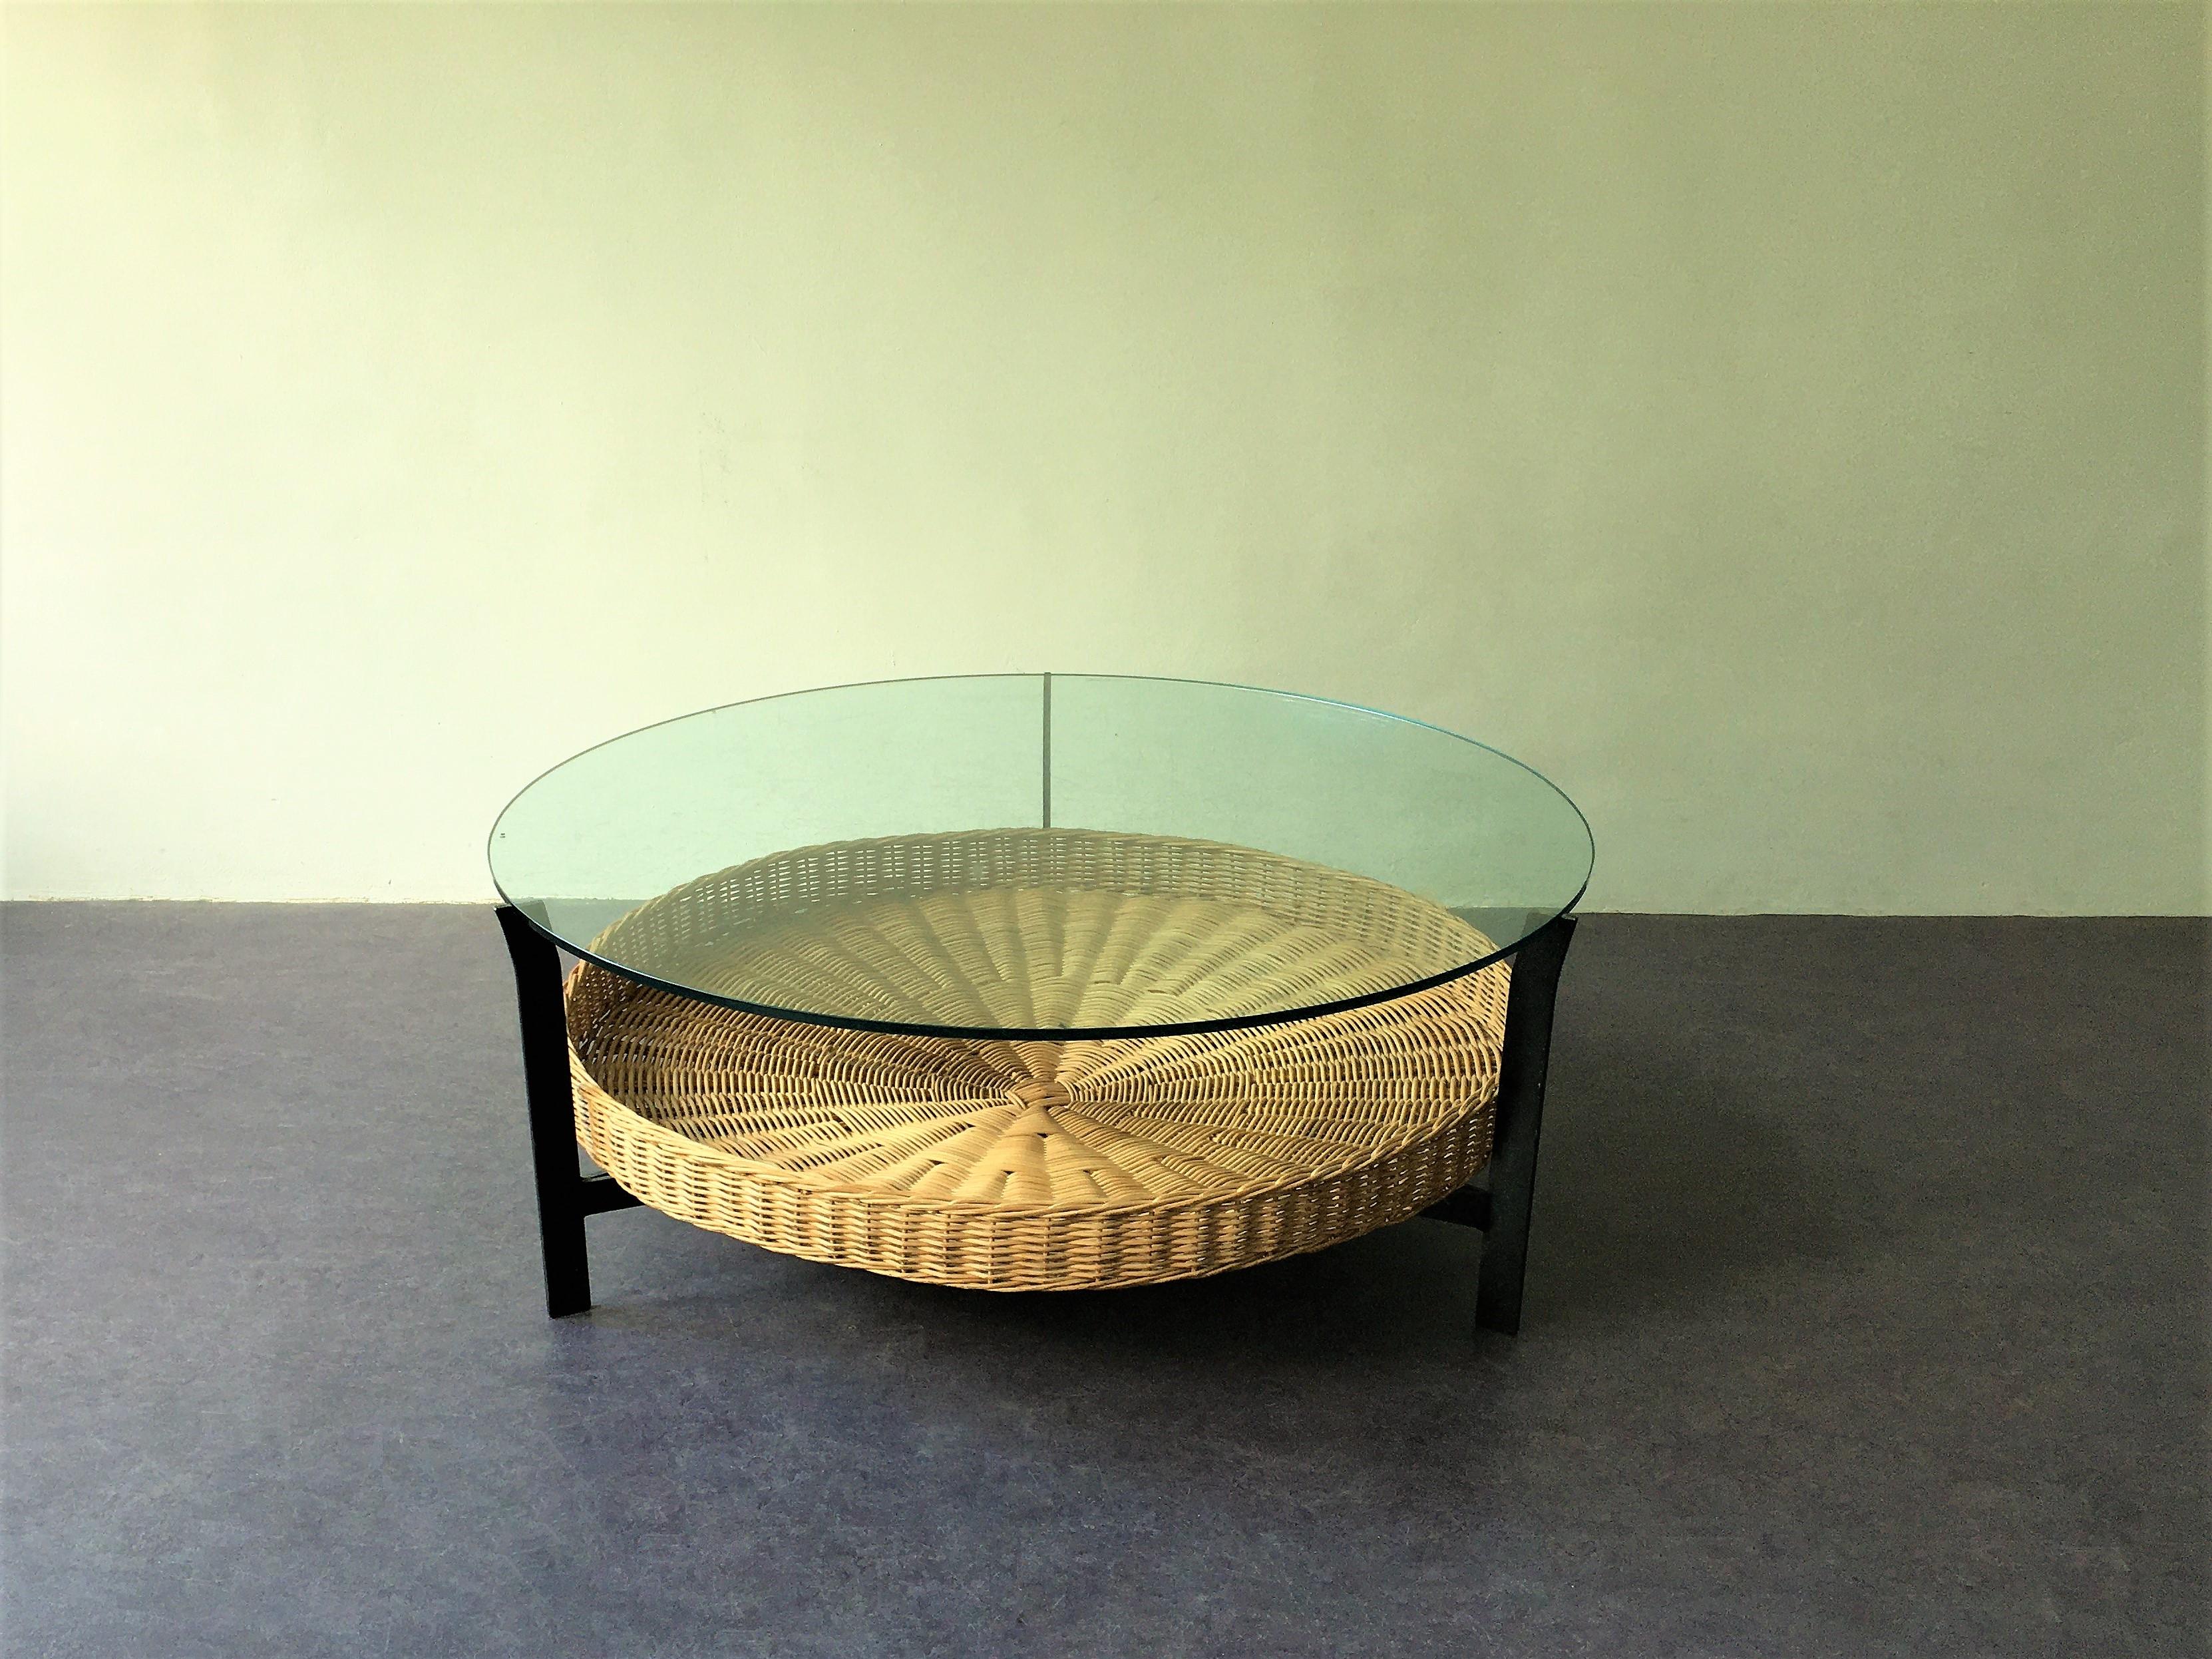 The design of this table does show similarities to the designs and productions of Janni van Pelt, Martin Visser and/or Rohé. It has some scratches to the glass top from use. The glass has two little spots that show that this is a high quality safety